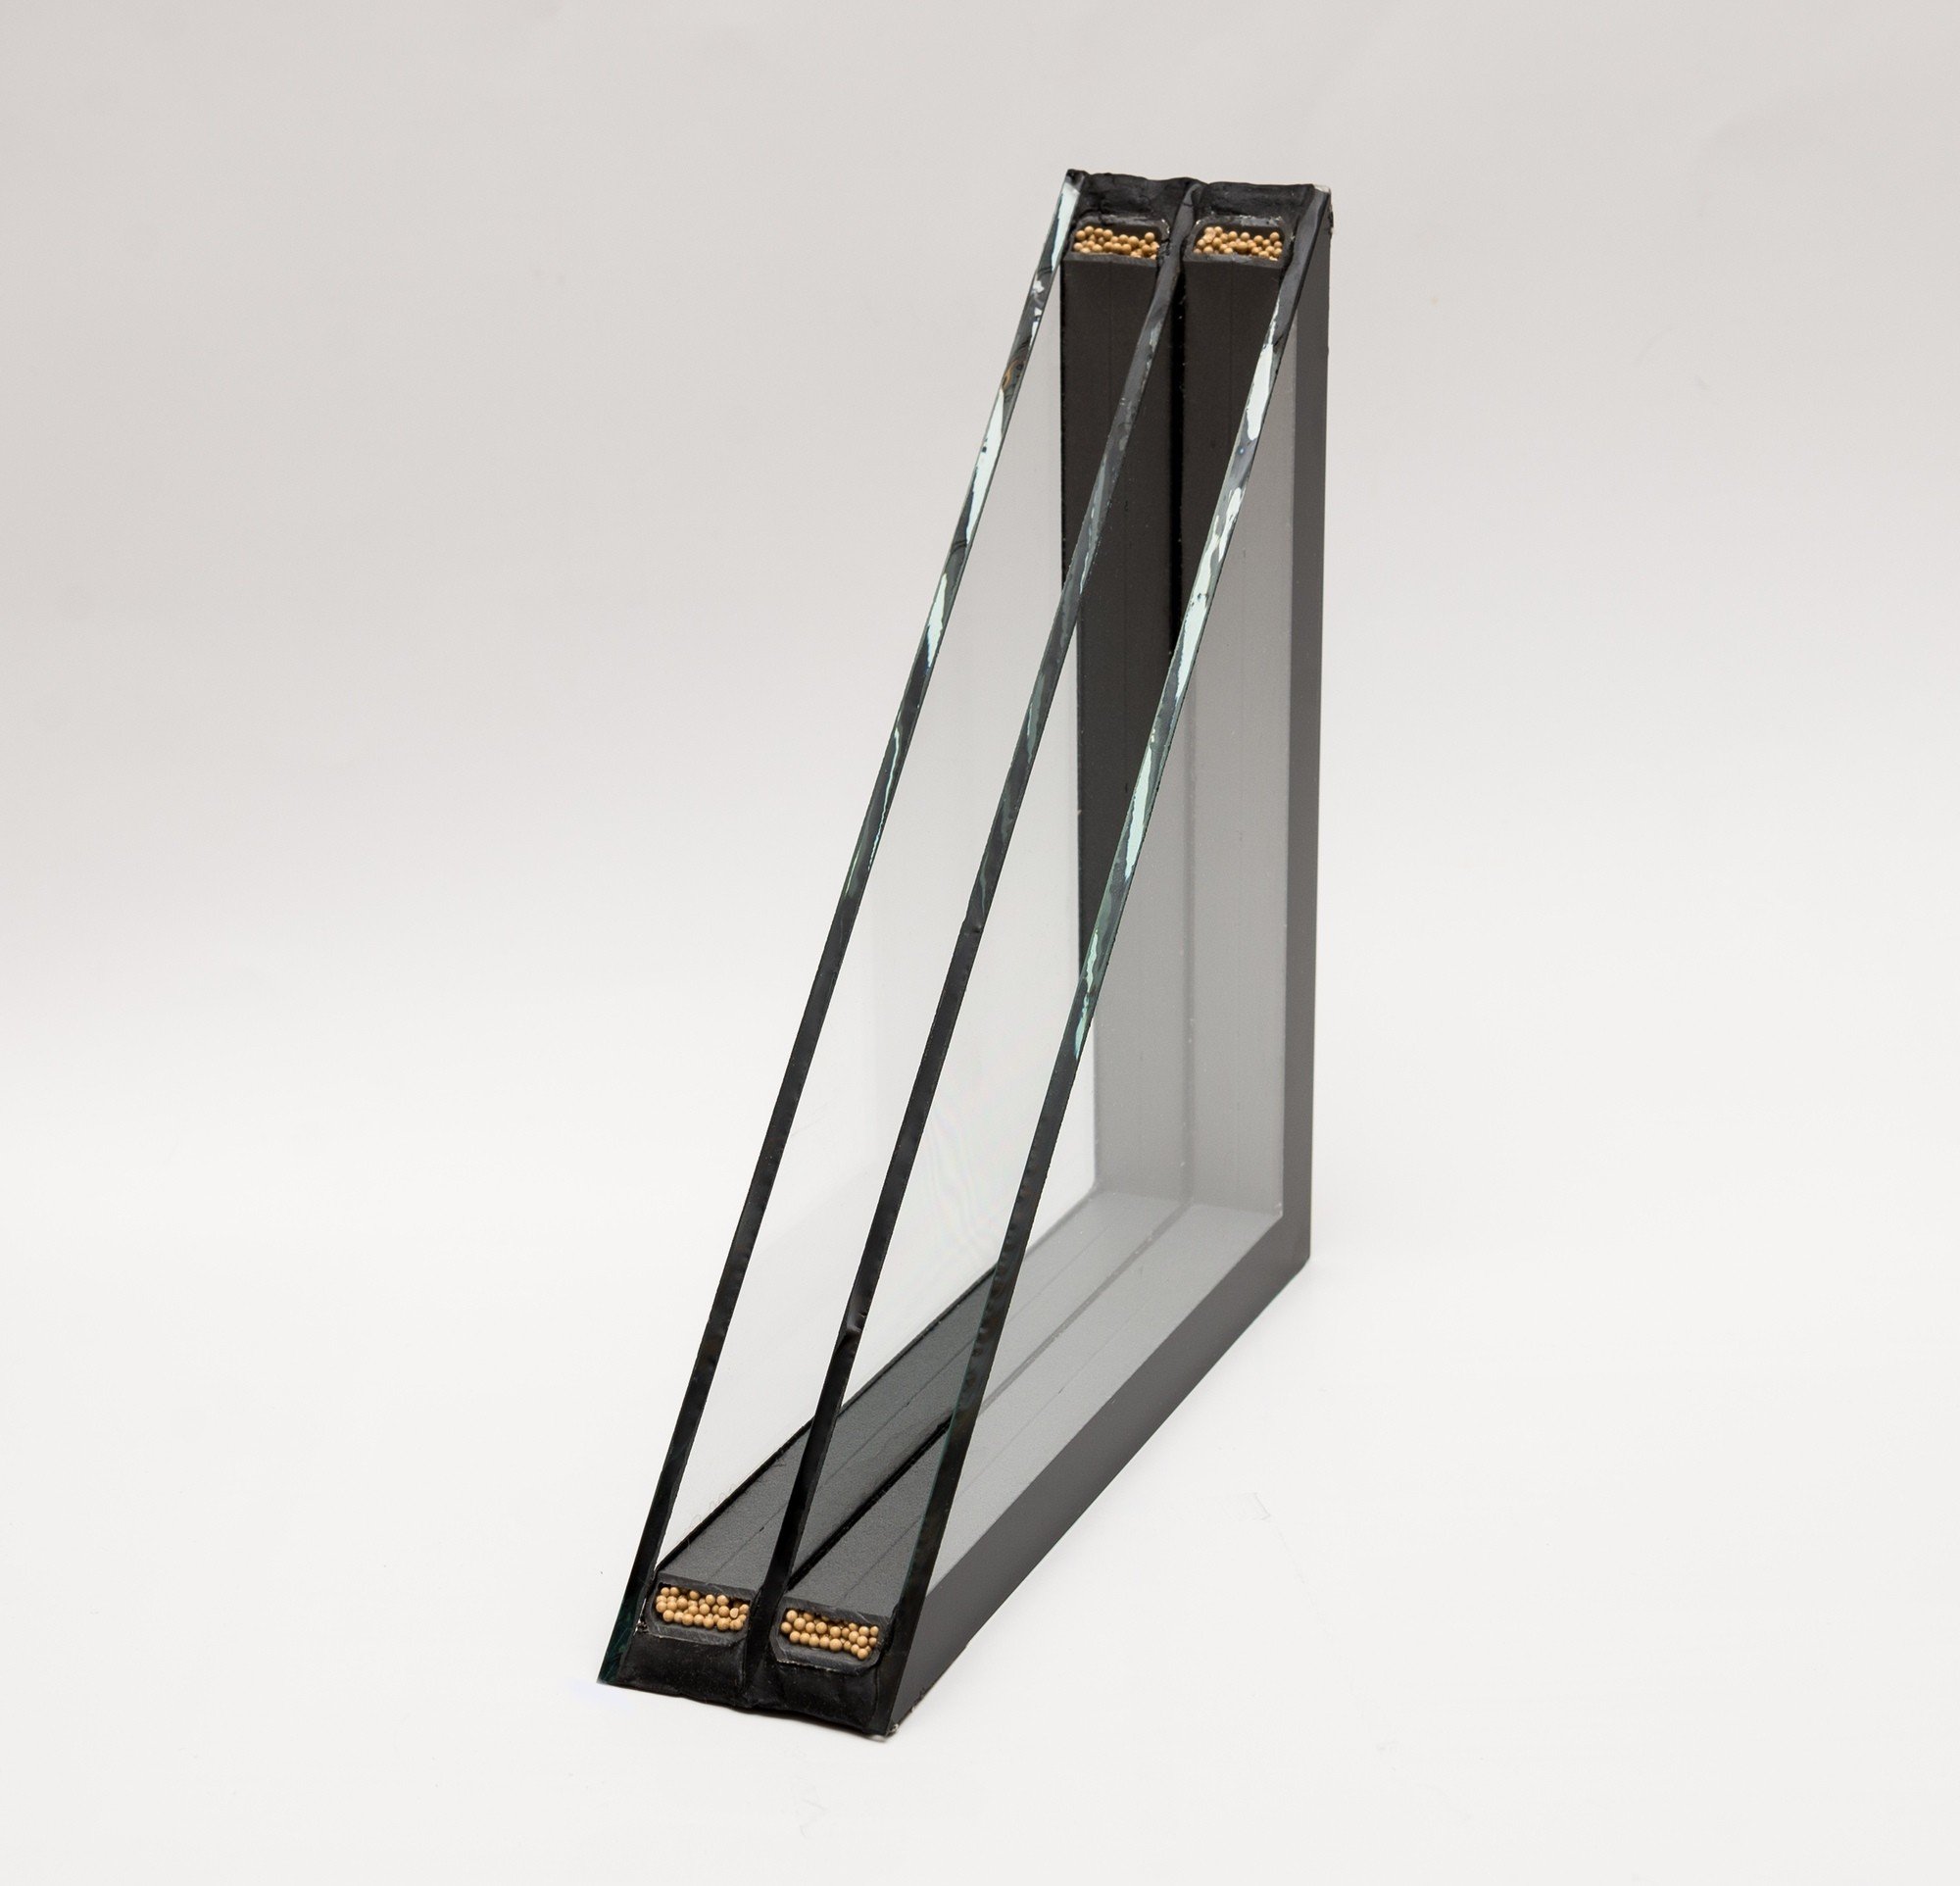 DRUTEX windows with the world-warmest Swisspacer Ultimate frame.